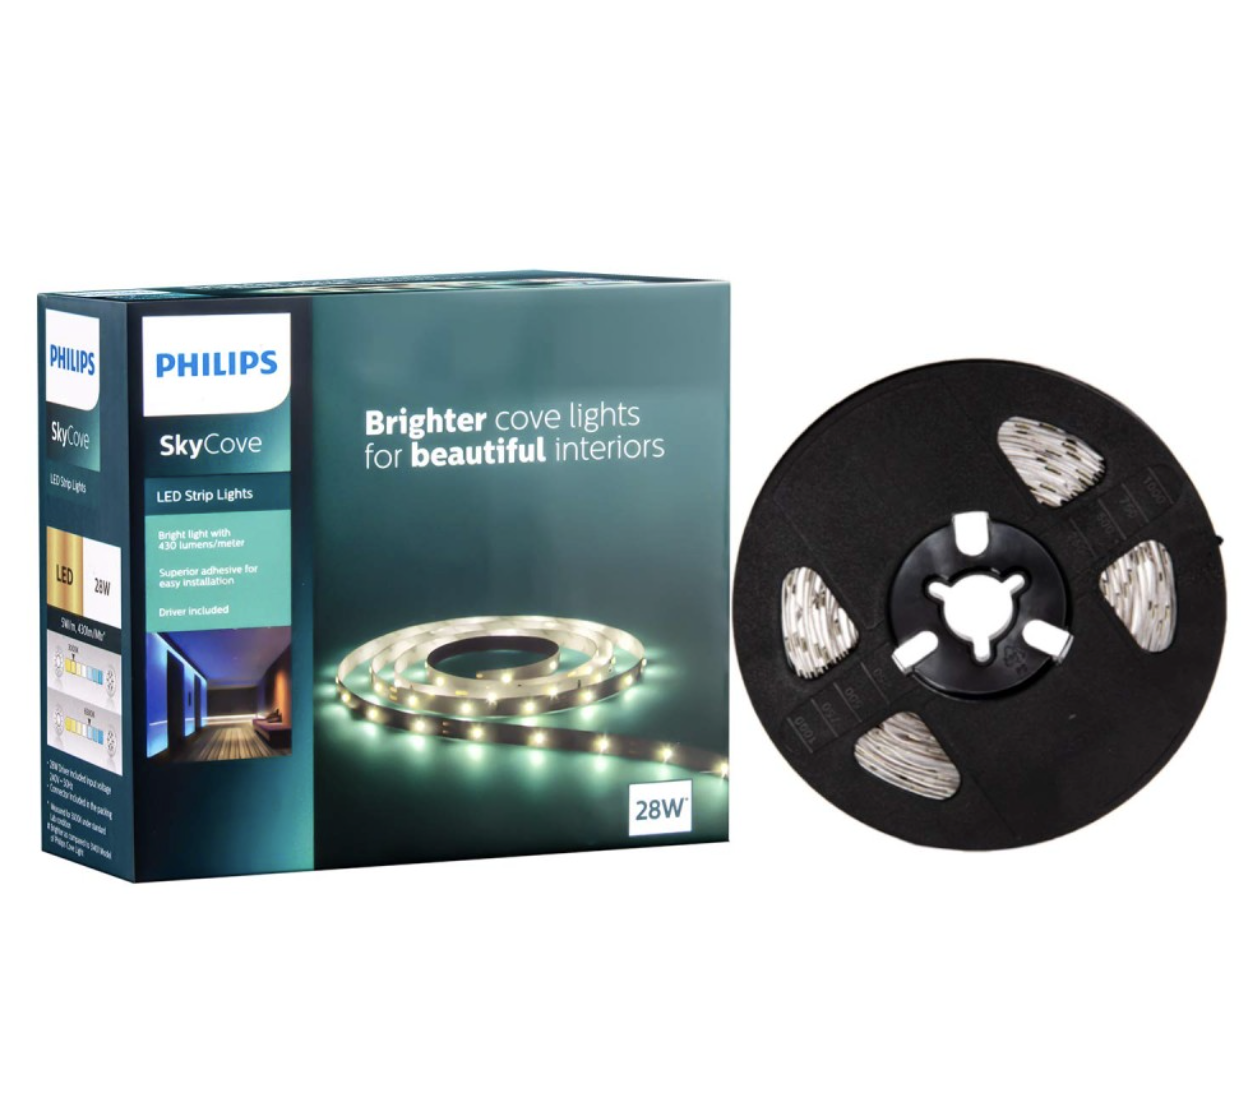 PHILIPS Sky Cove Cool white 5 m 28 W LED Strip Lights_0